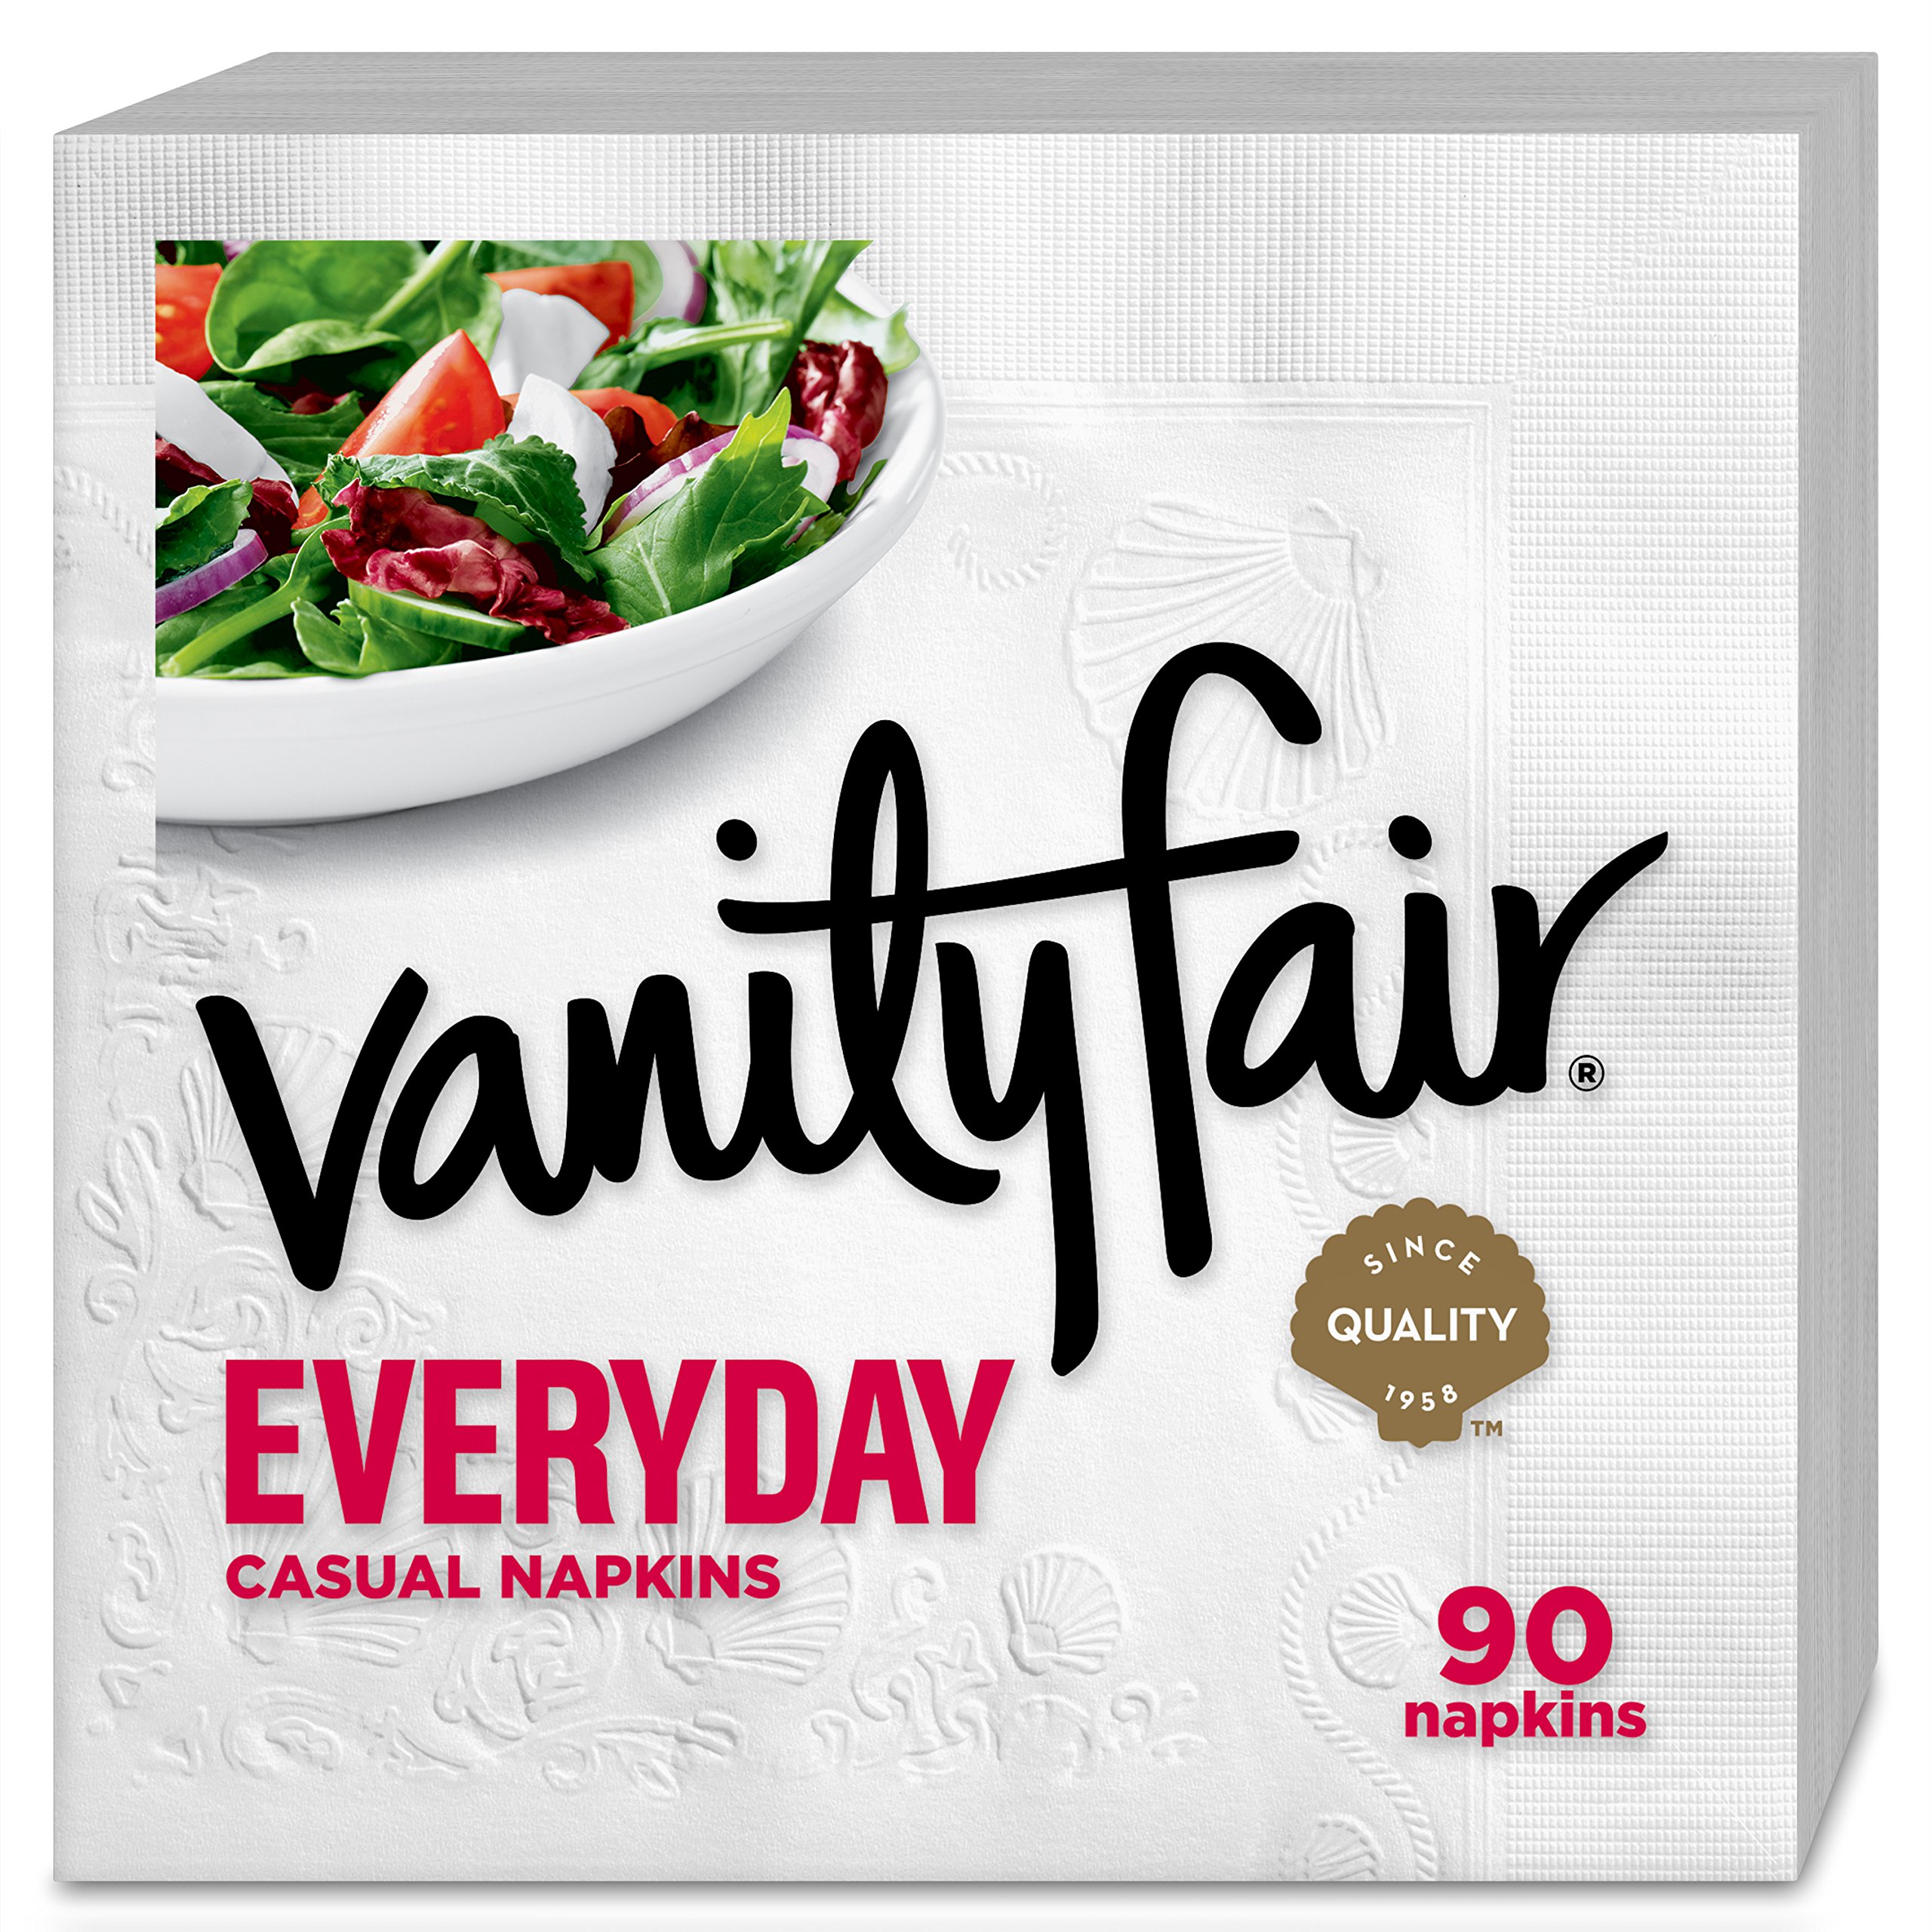 Vanity Fair Everyday Napkins, 1080 Count, White Paper Napkins, 90 Count (Pack of 12)